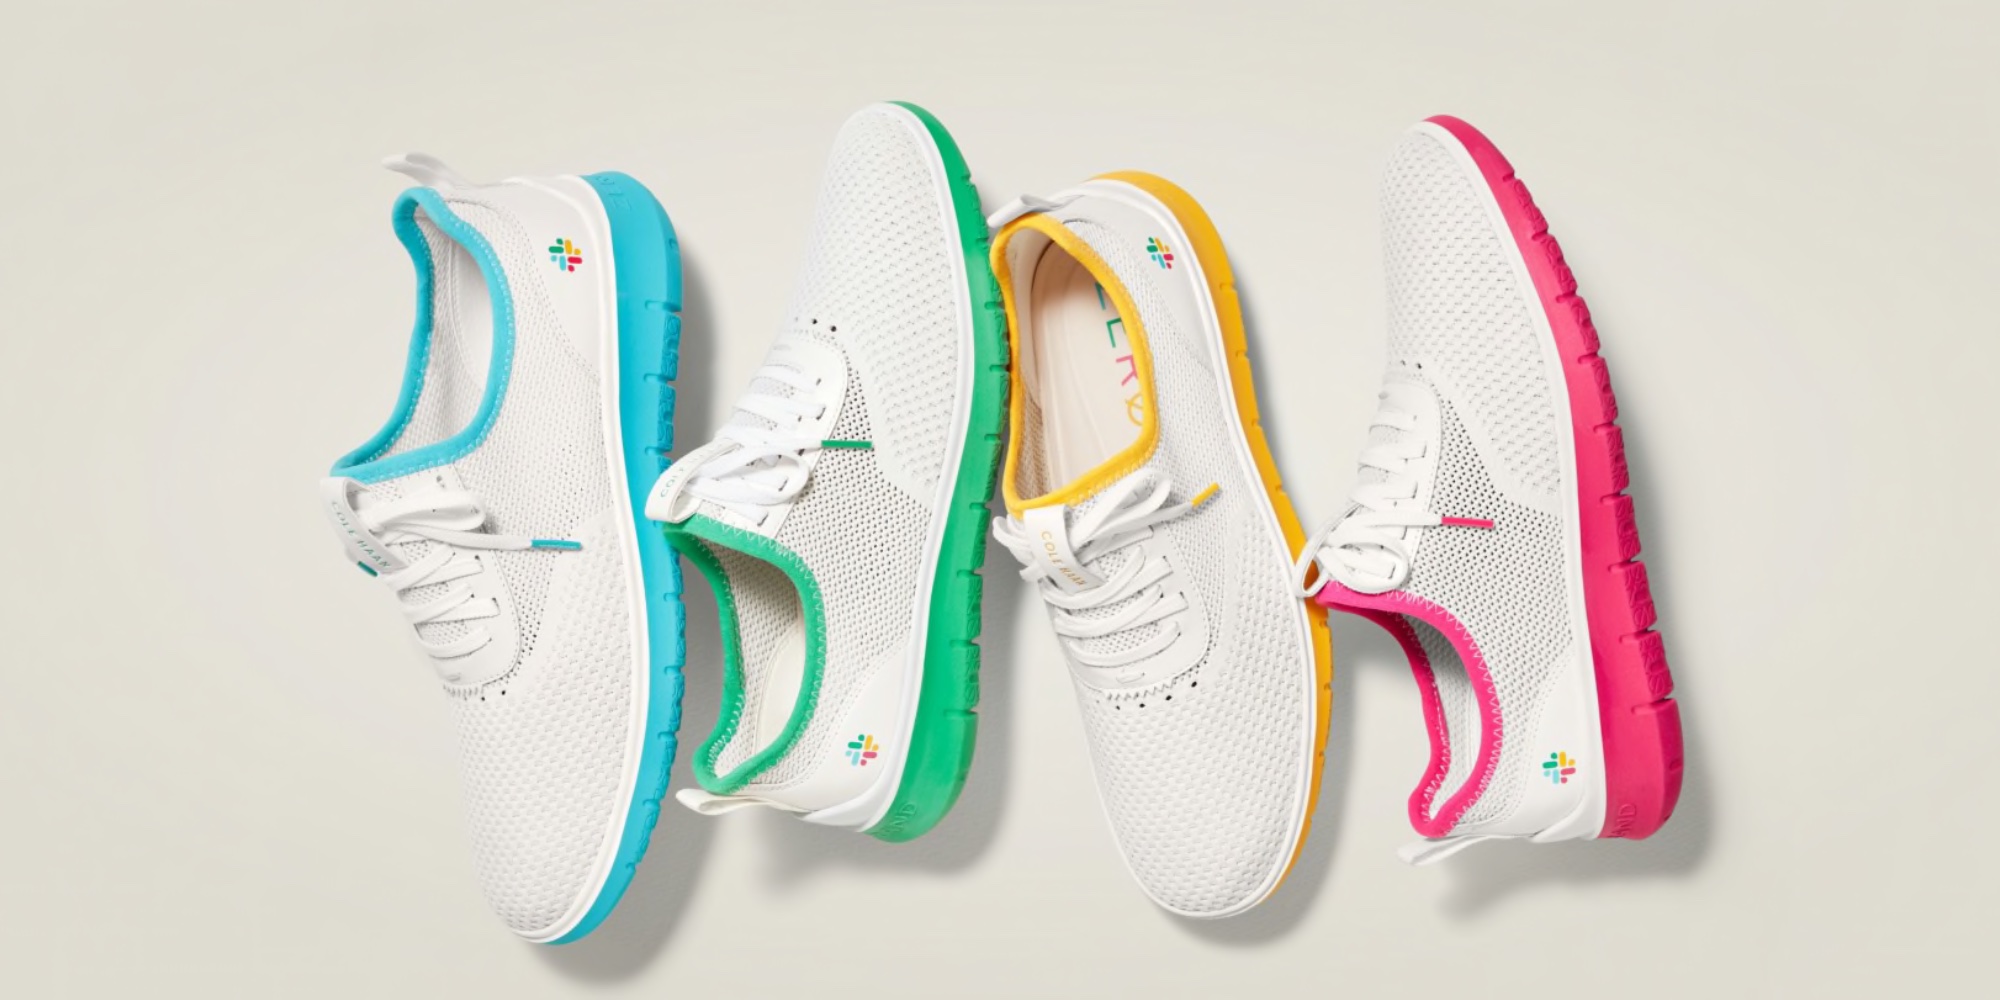 Slack Cole Haan Shoes debut with vibrant designs - 9to5Toys